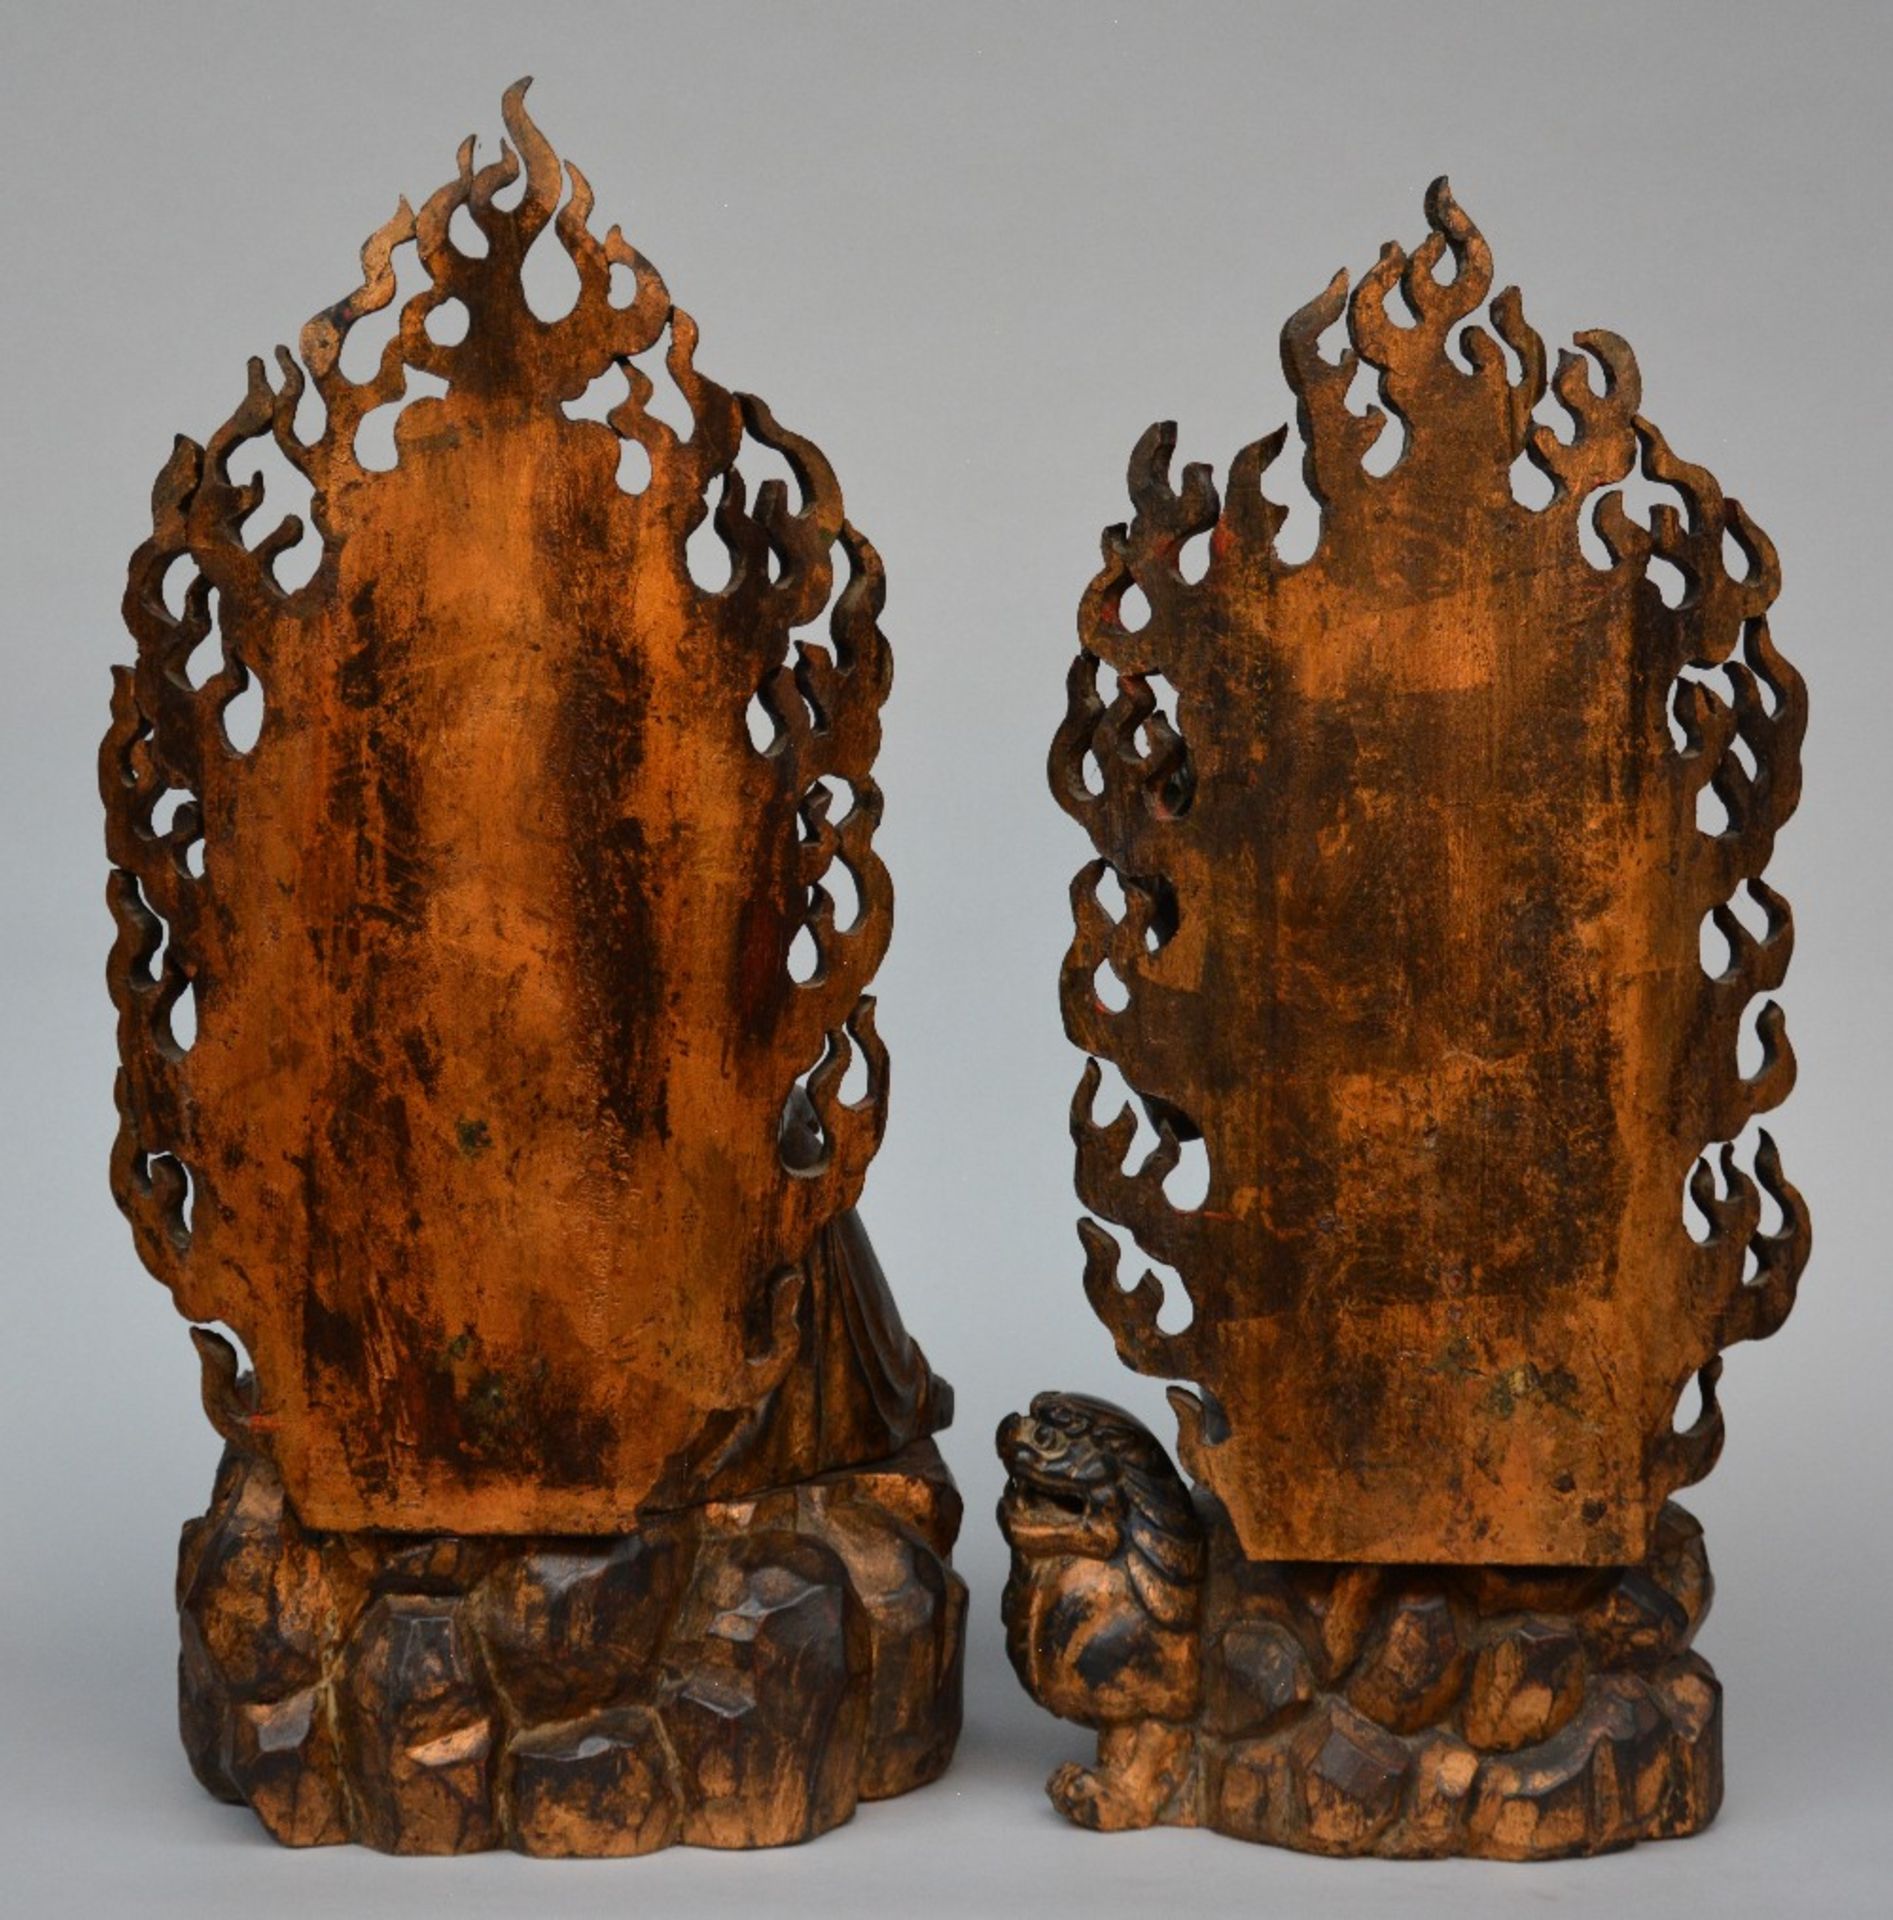 Two Oriental gilt wooden and polychromed Buddhist priests, H 70 - 72 cm - Image 3 of 6